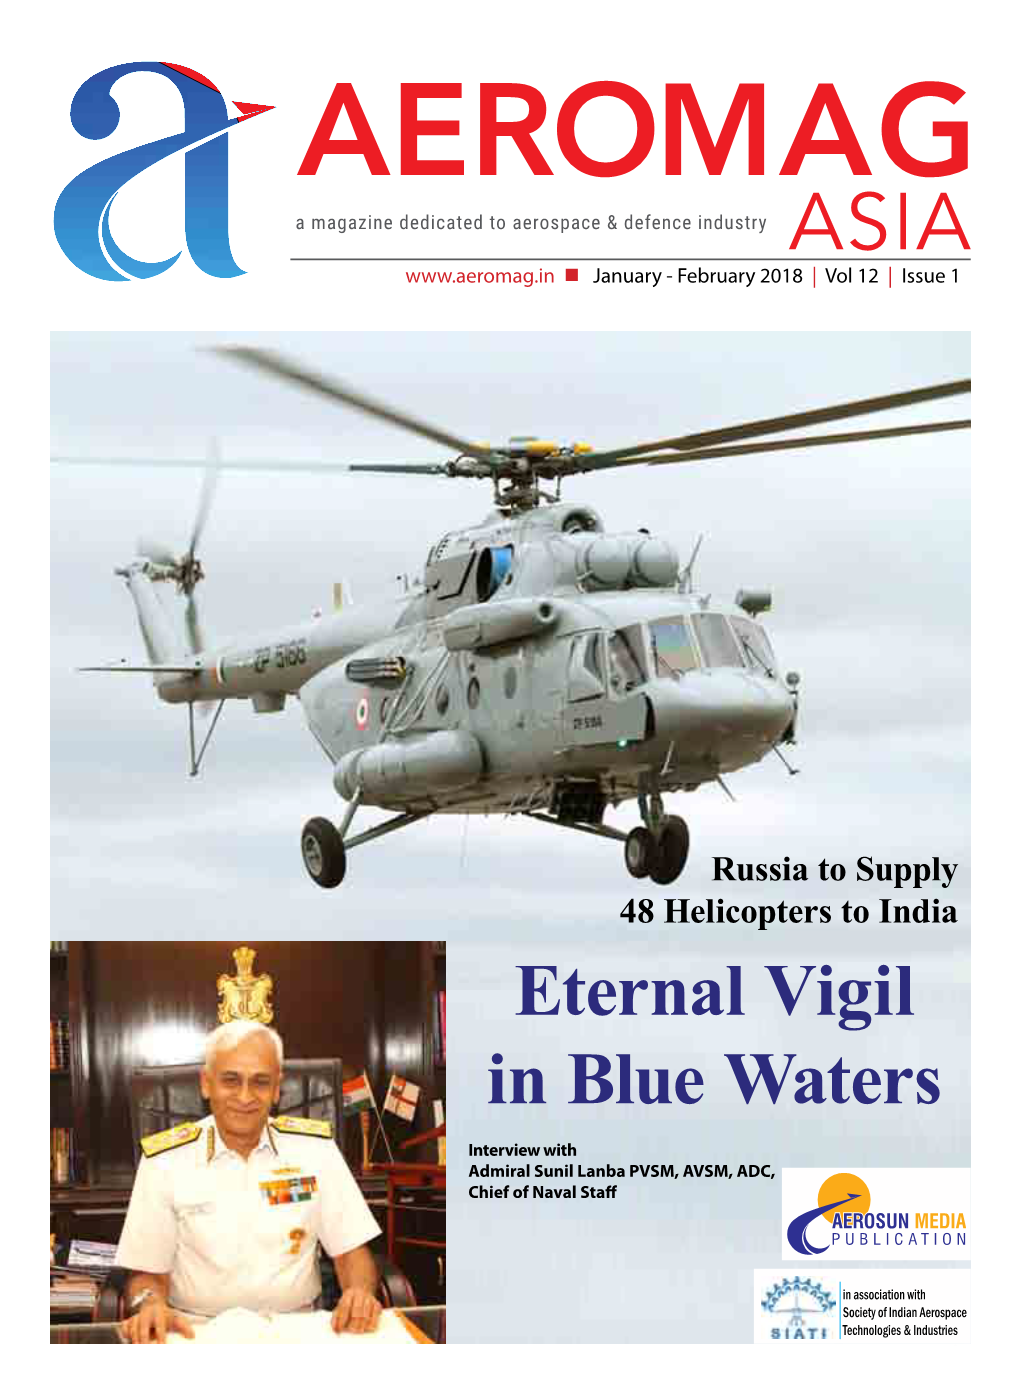 Eternal Vigil in Blue Waters Interview with Admiral Sunil Lanba PVSM, AVSM, ADC, Chief of Naval Staff